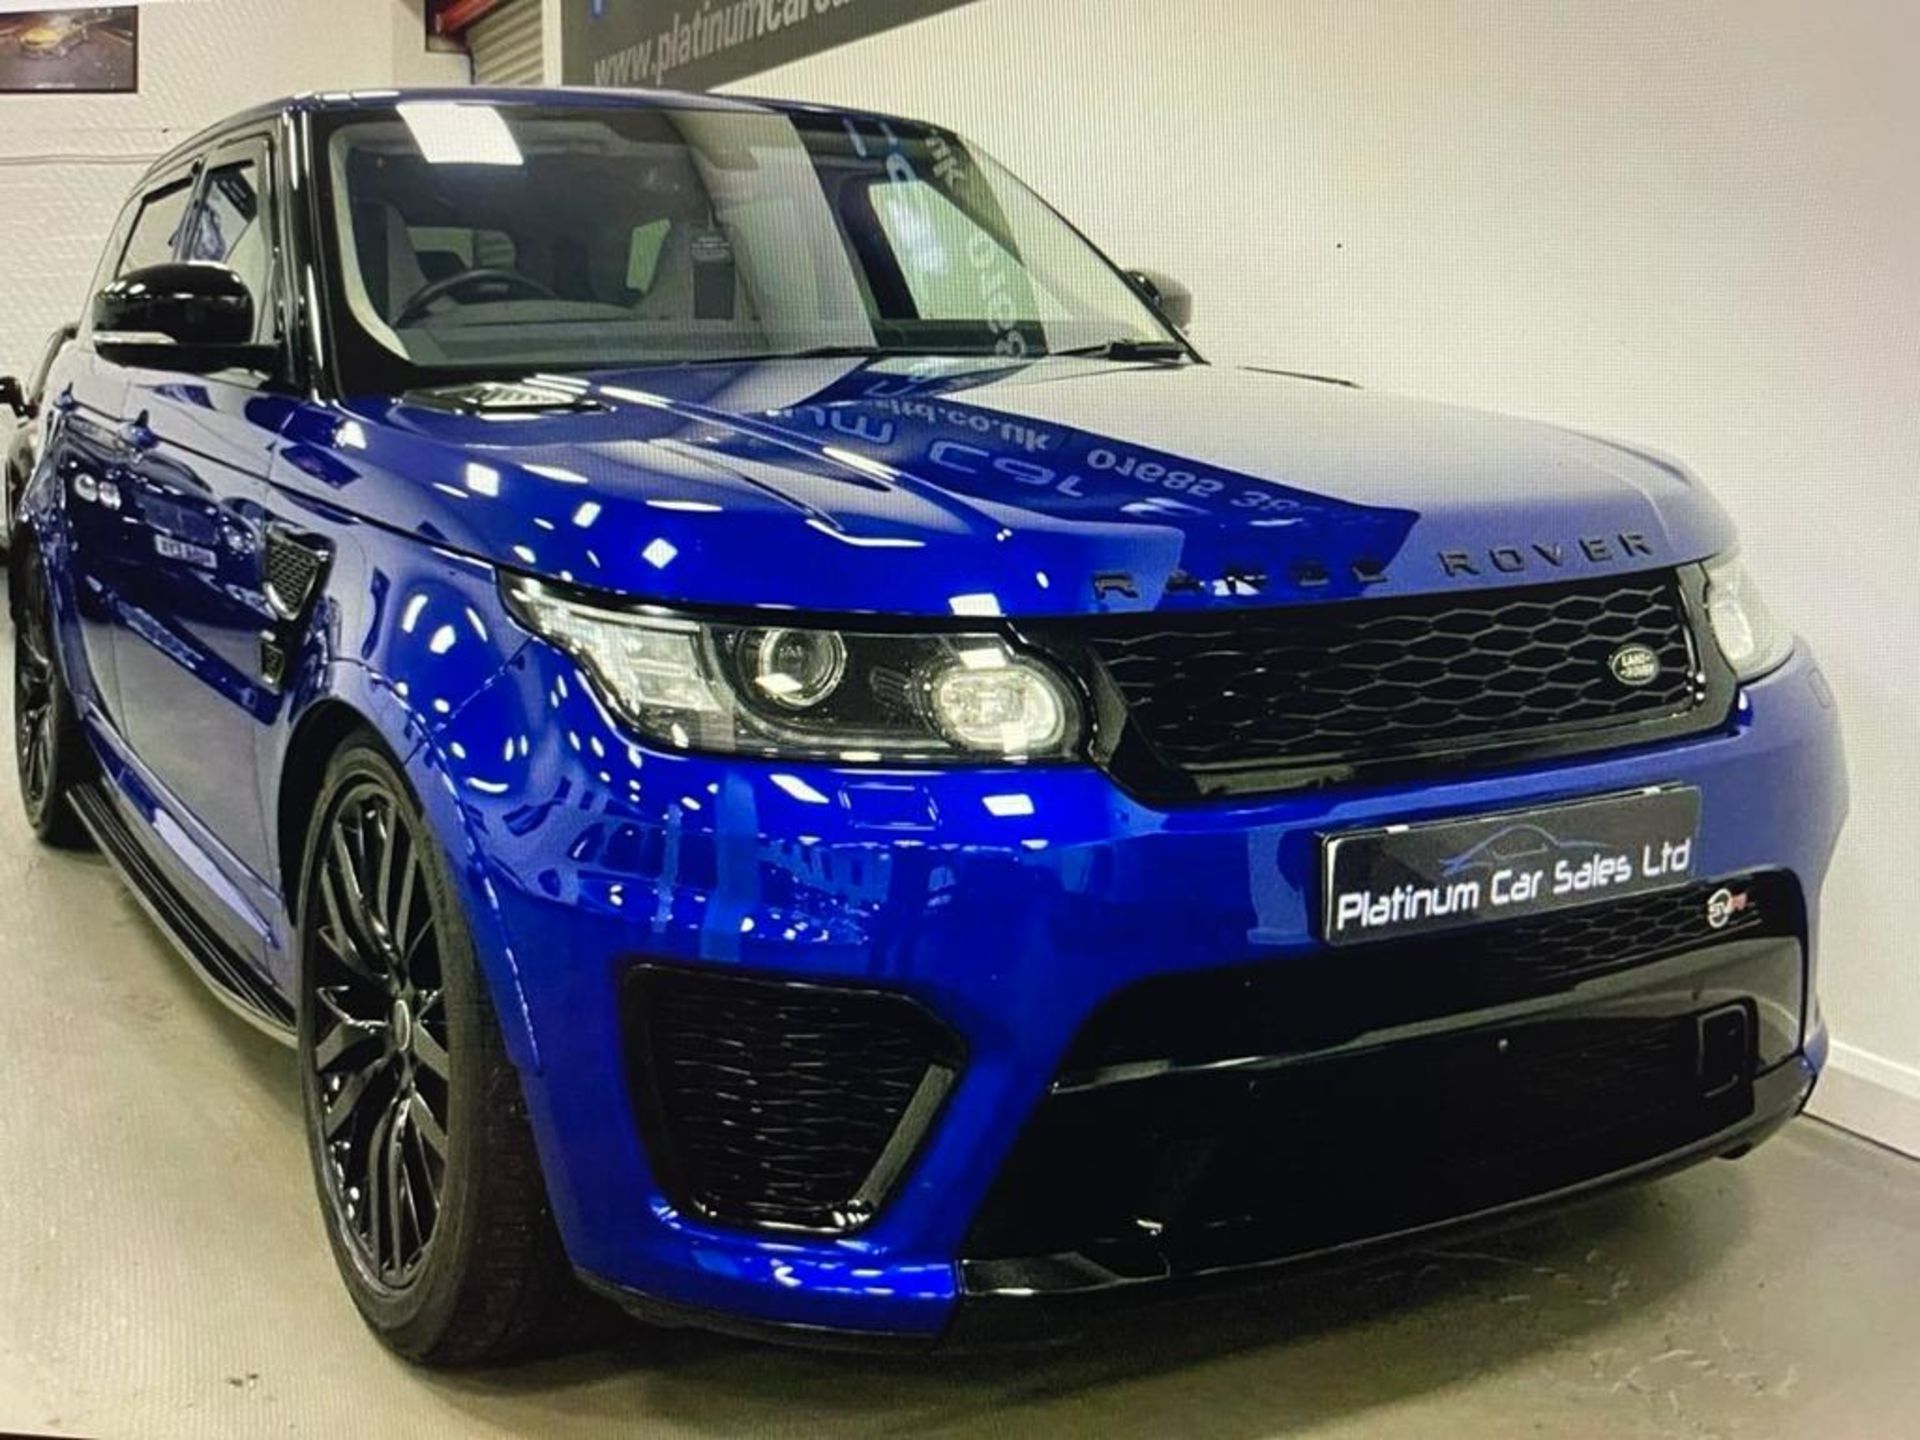 2016 RANGE ROVER SPORT SVR AUTOBIOGRAPHY DYNAMIC V8 SUPERCHARGED AUTOMATIC 5.0 550PS PETROL ENGINE